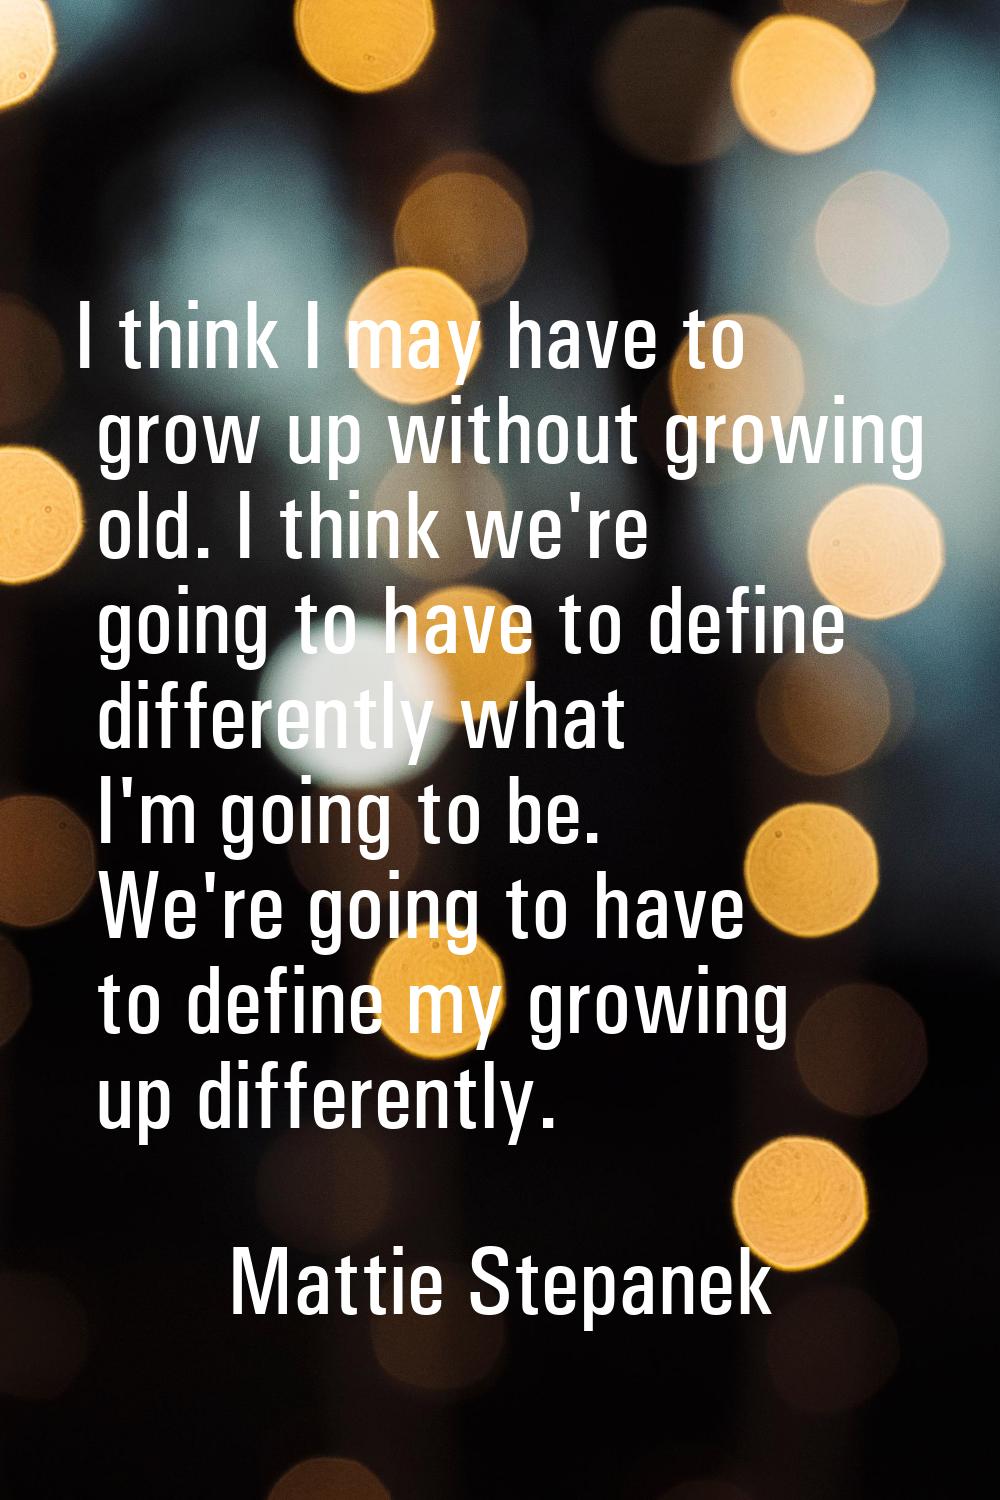 I think I may have to grow up without growing old. I think we're going to have to define differentl